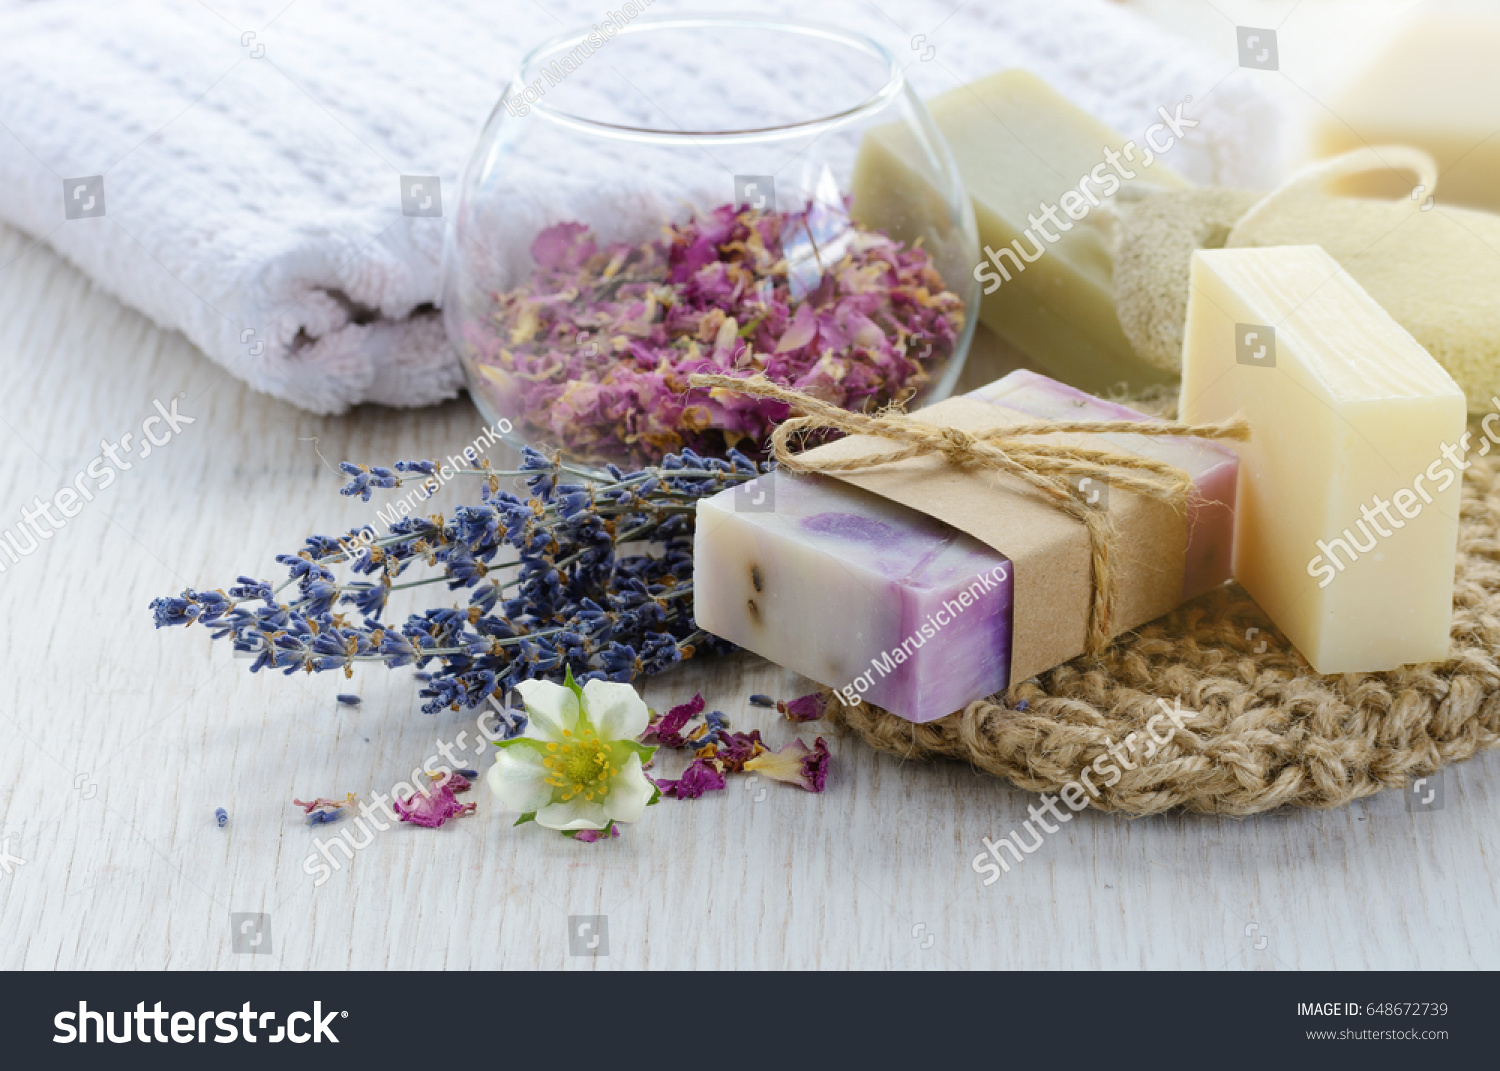 Handmade Soap with bath and spa accessories. Dried lavender and rose petals #648672739